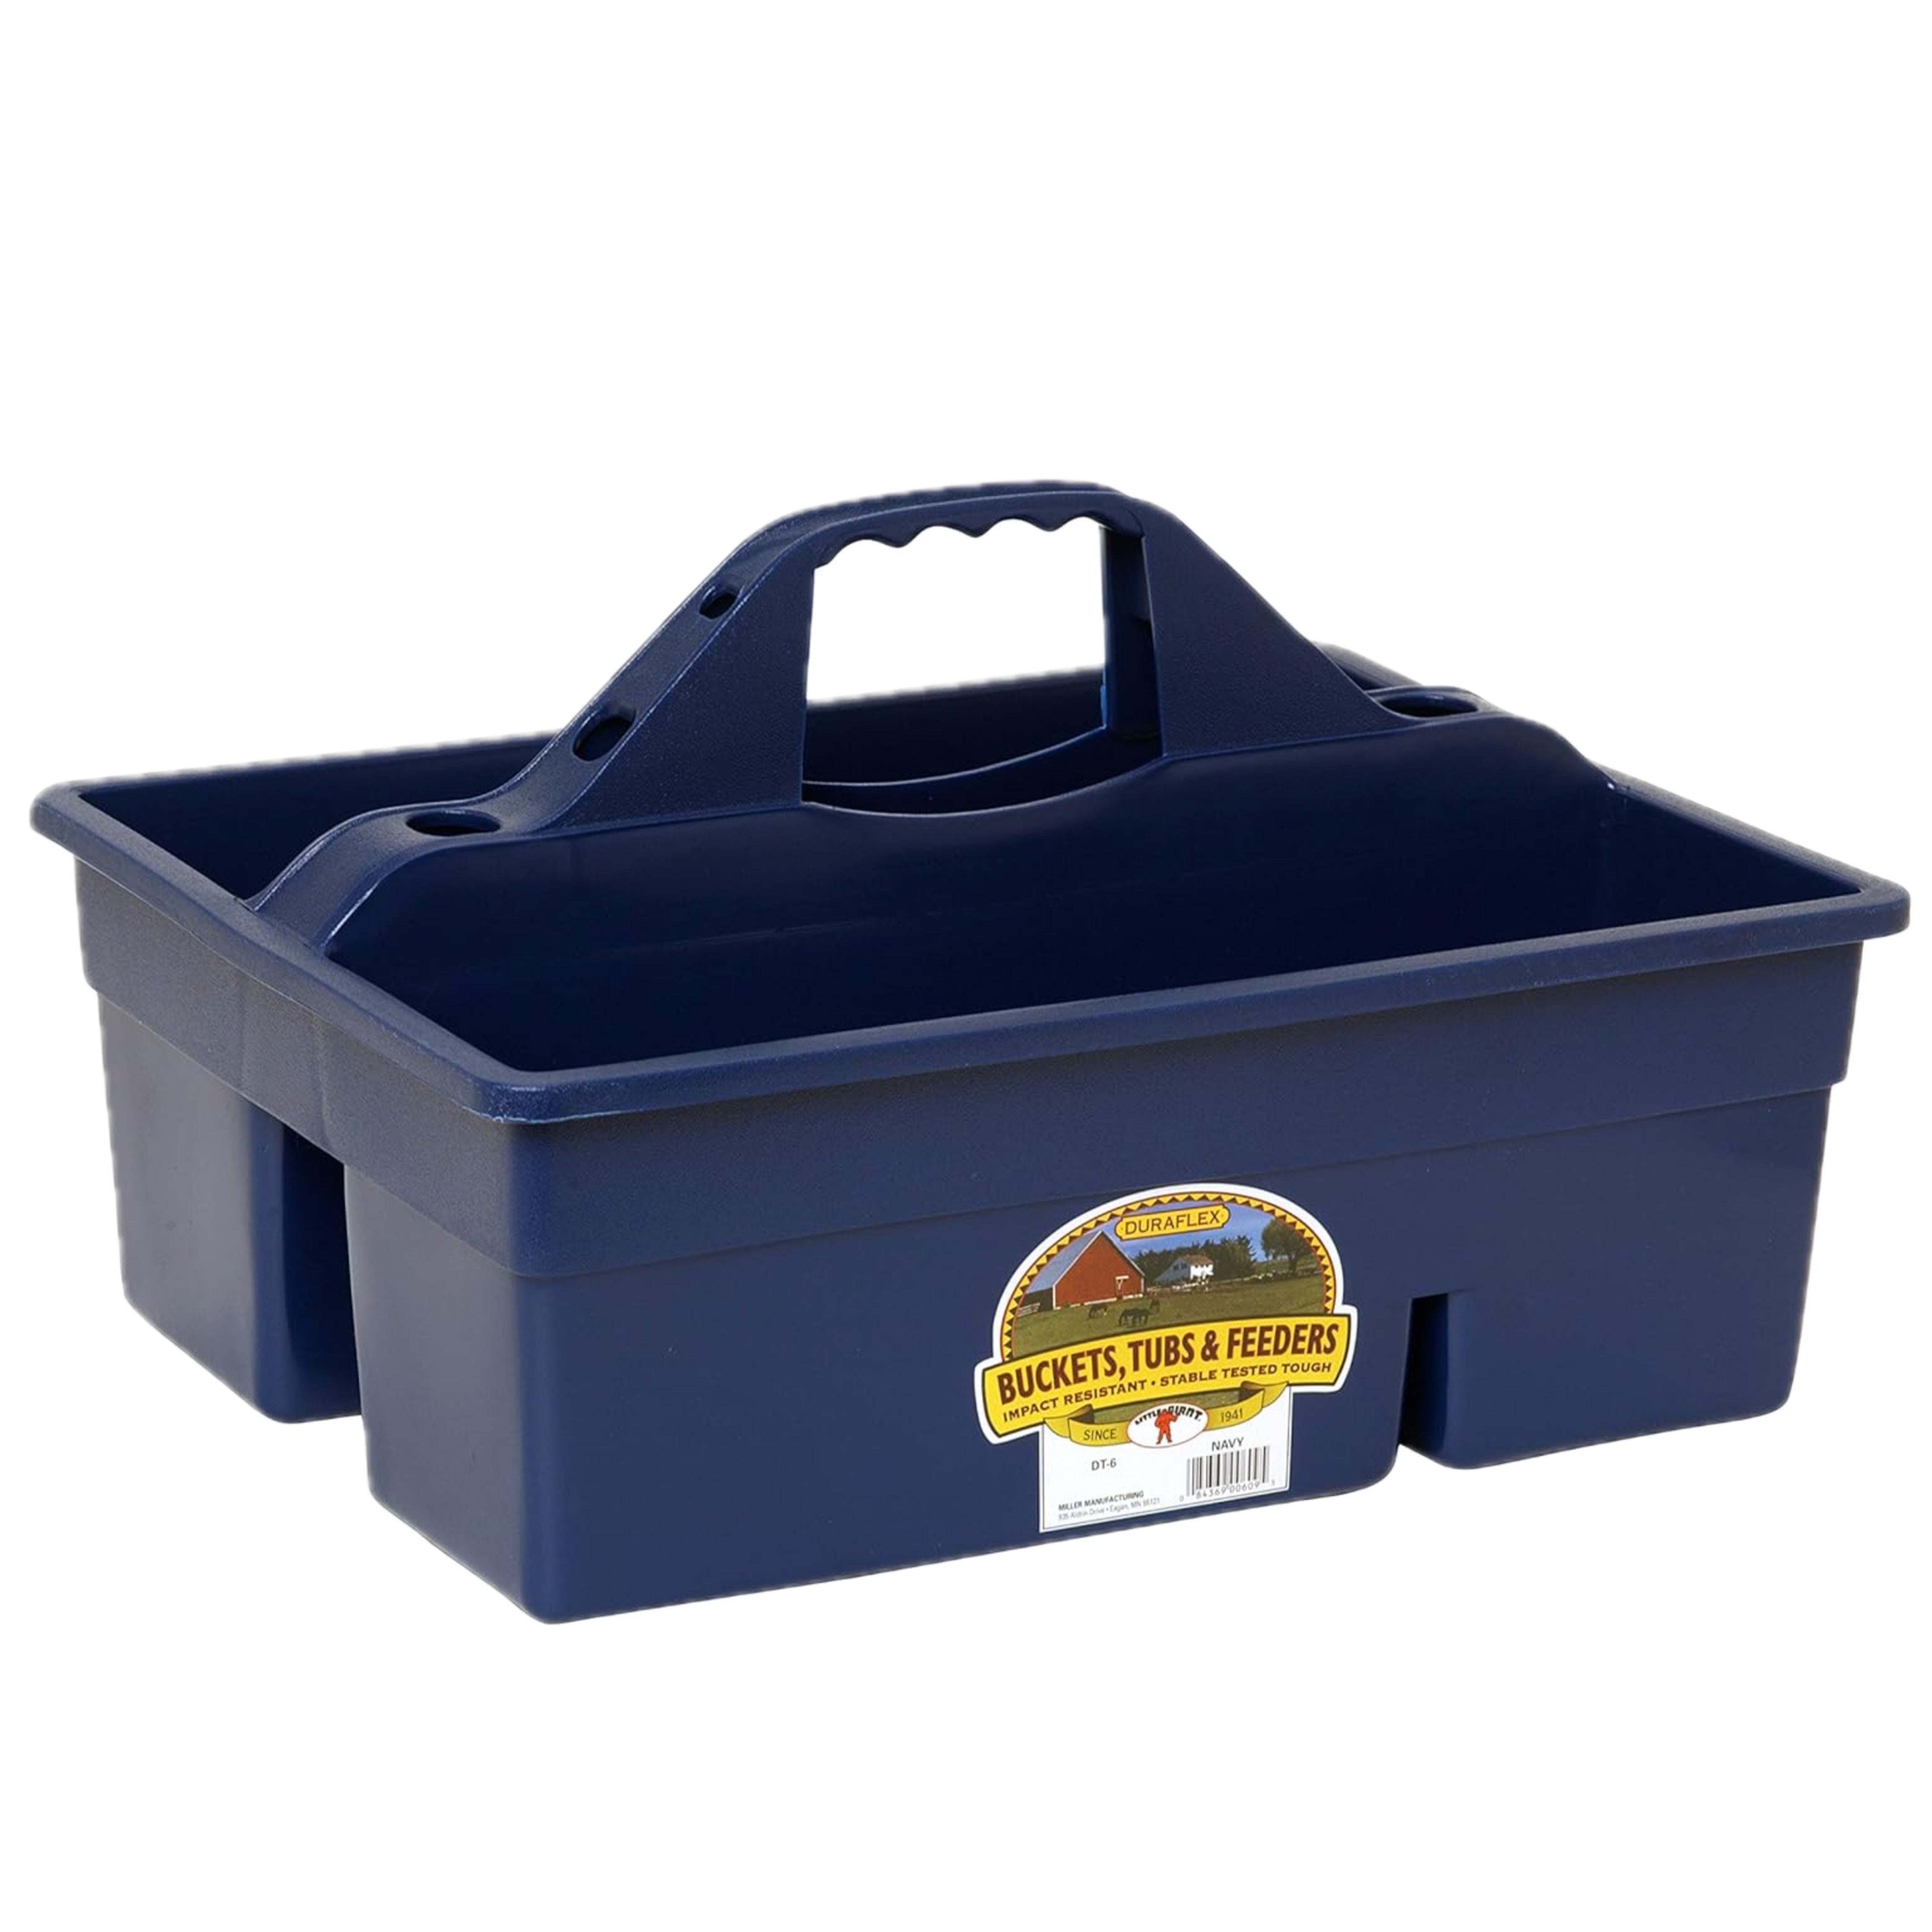 DuraTote Groom Caddy